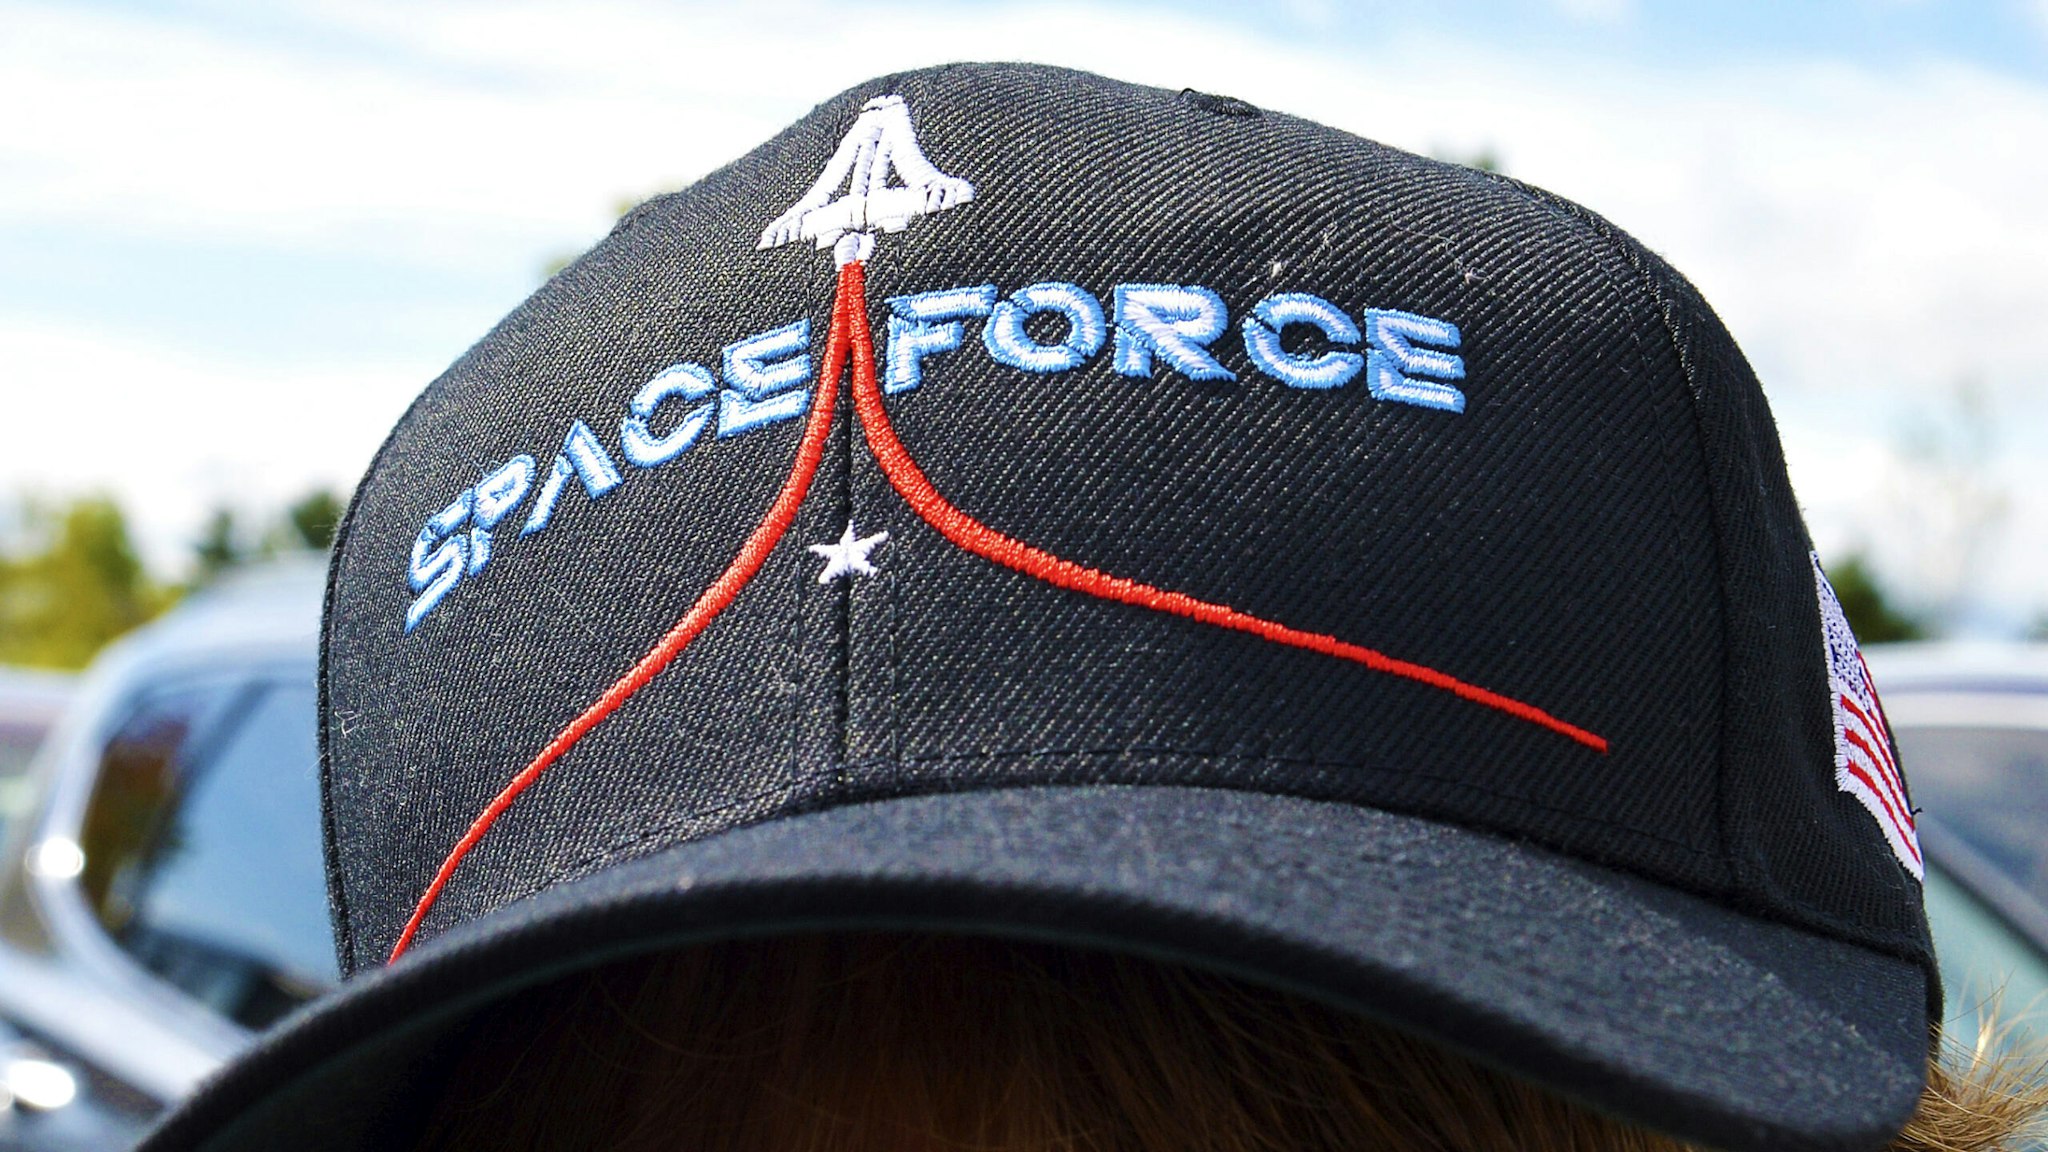 A woman wears a Space Force hat while boarding a shuttle bus at the Manchester Mall going to Manchester Airport in Londonderry, New Hampshire on August 28, 2020. - US President Donald Trump is scheduled to speak to supporters in Londonderry on August 28.